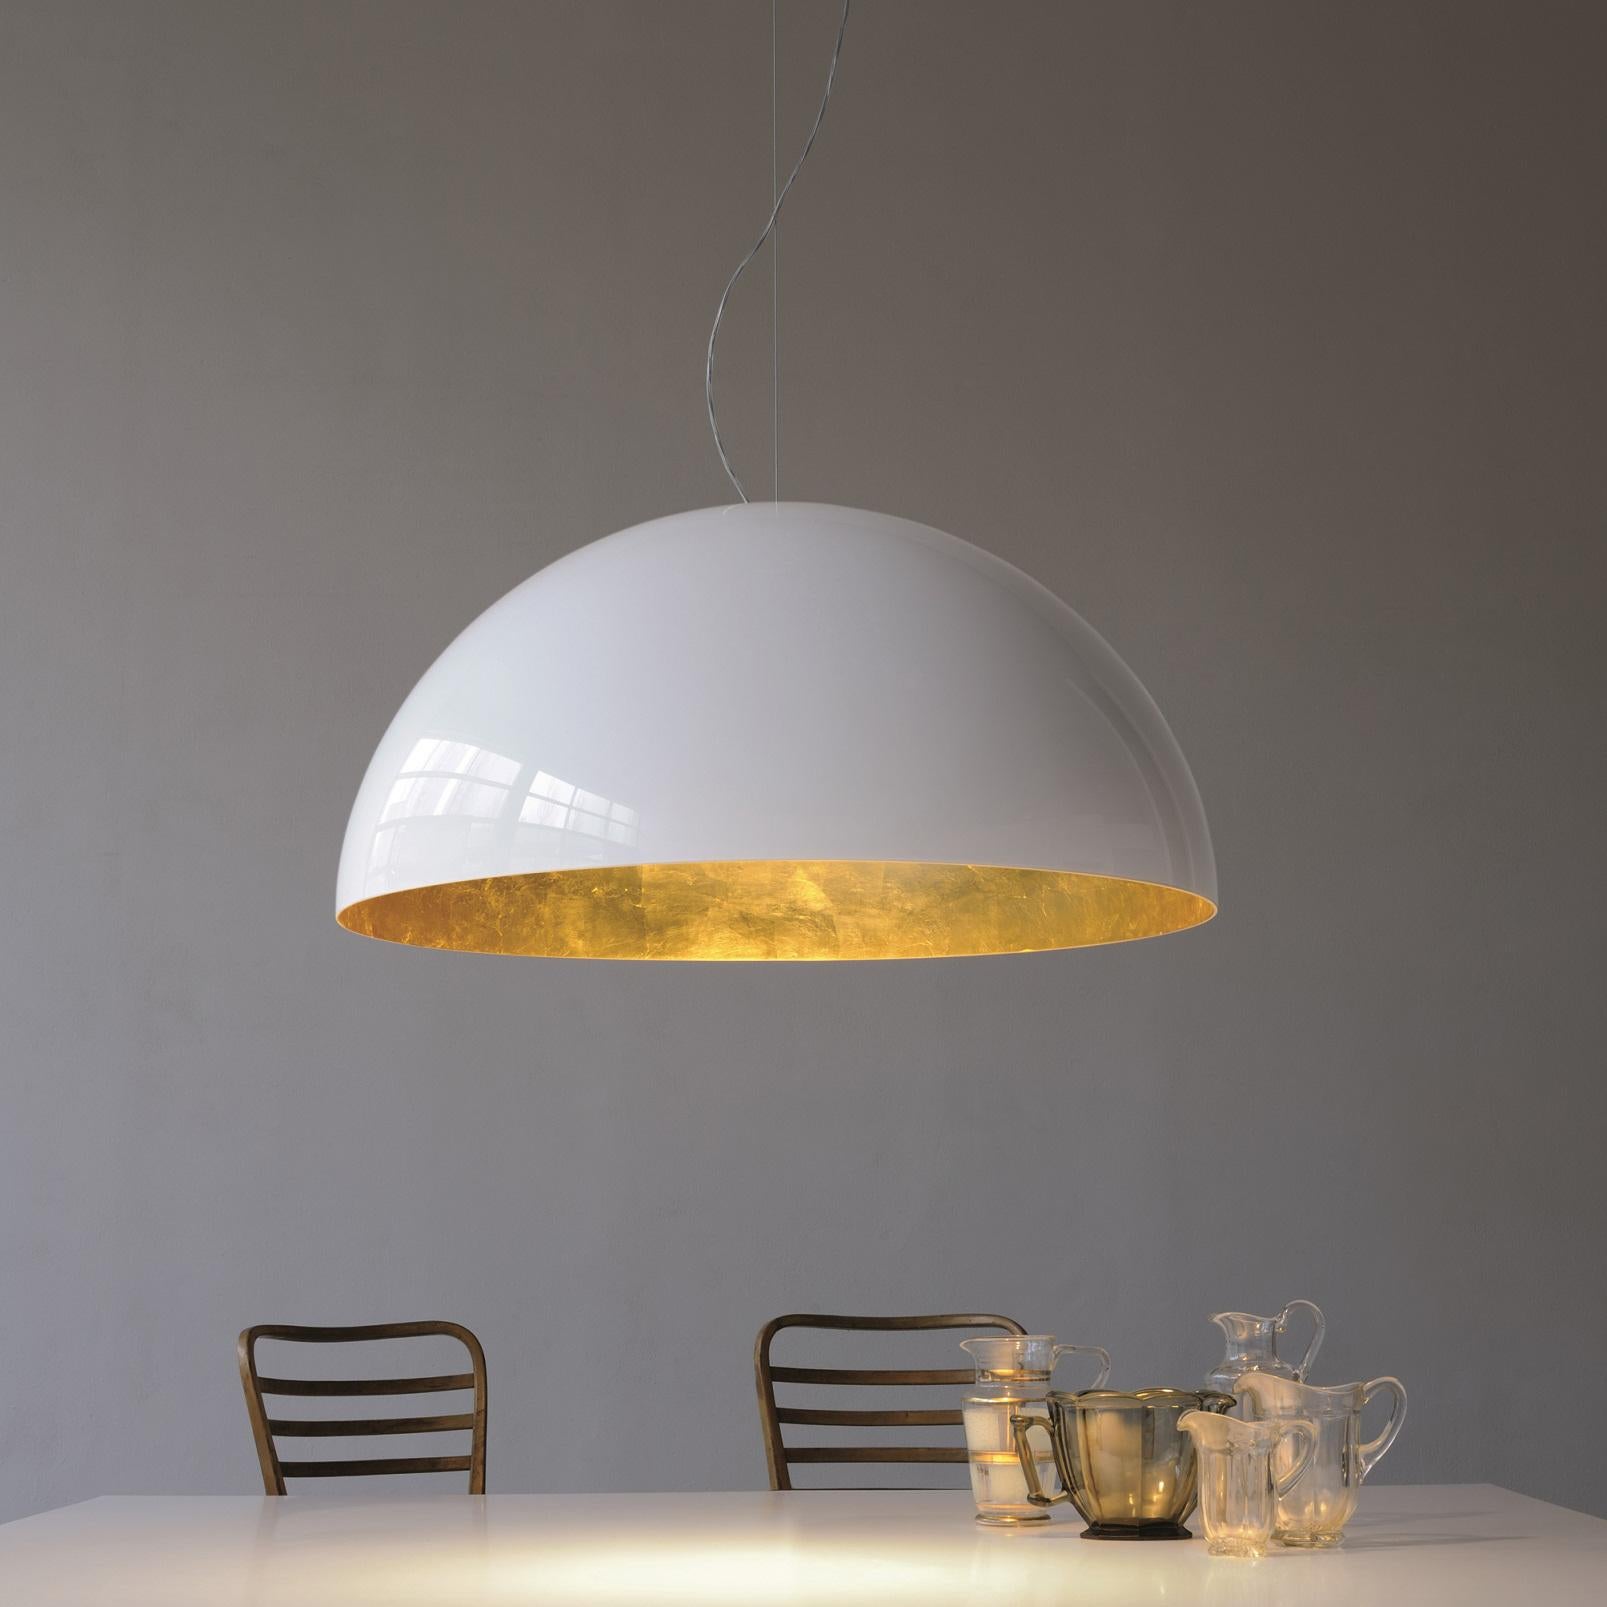 Italian Vico Magistretti Suspension Lamp 'Sonora' White Outside and Gold Inside by Oluce For Sale